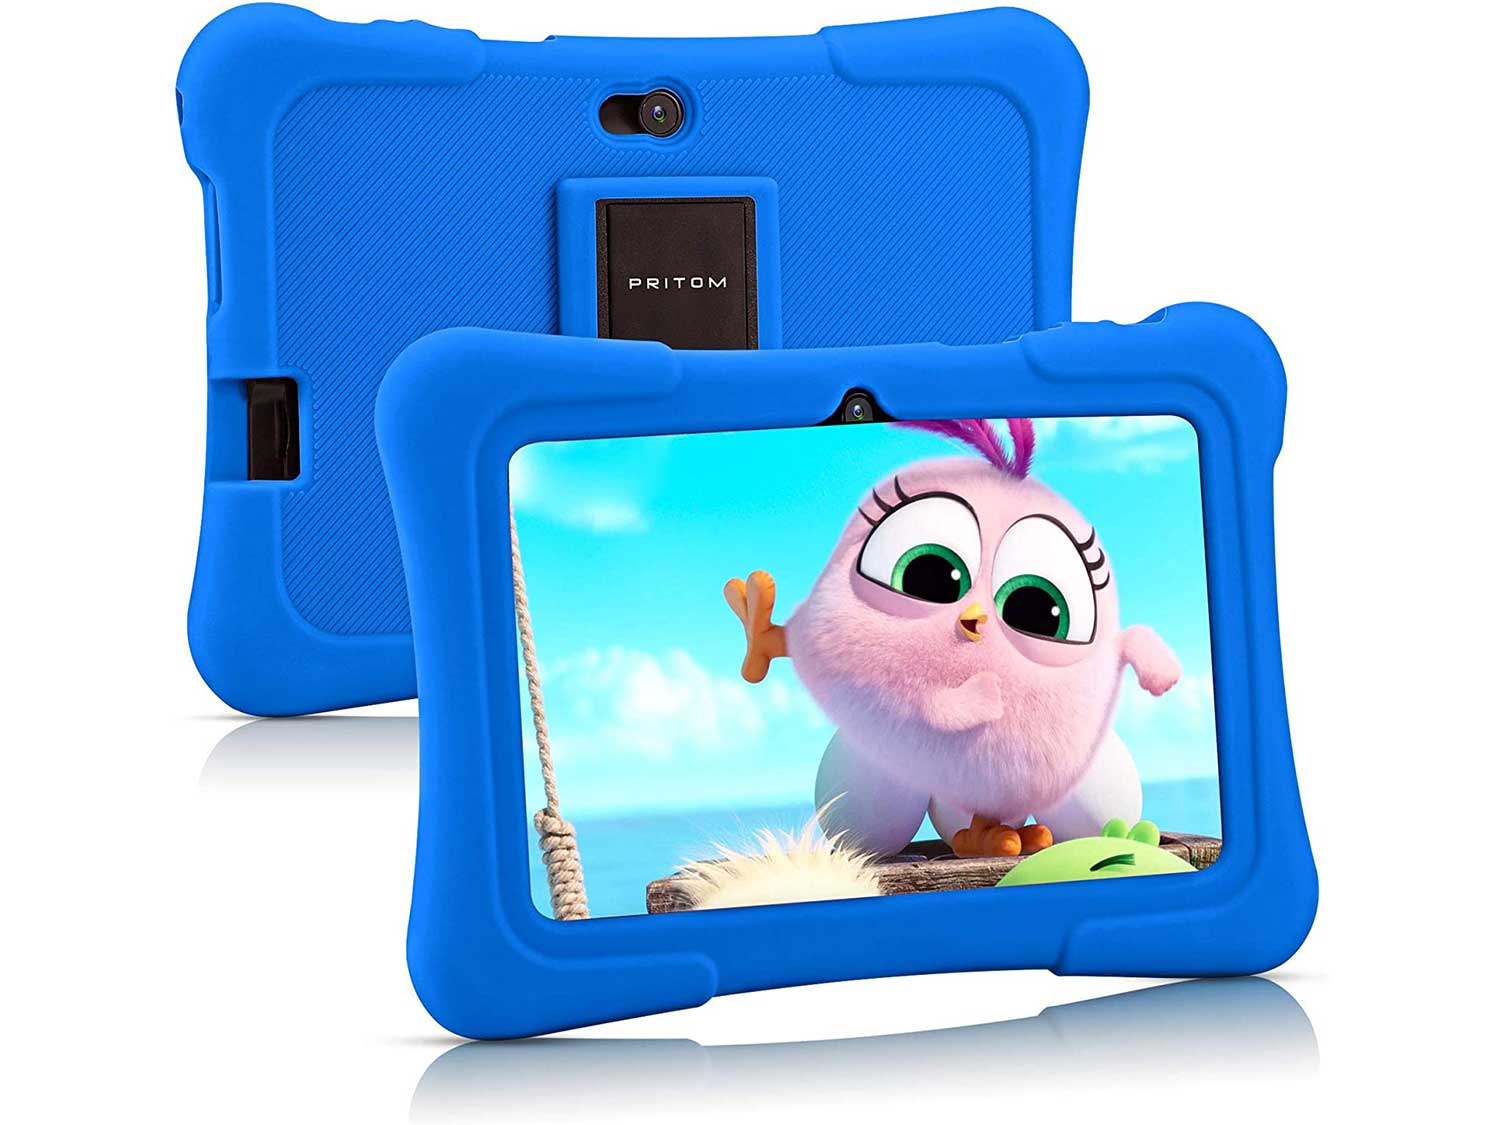 Pritom 7 inch Kids Tablet, Quad Core Android,1GB RAM+16GB ROM, WiFi, Bluetooth, Dual Camera, Educational, Games, Parental Control, Kids Software Pre-Installed with Kids-Tablet Case (Dark Blue)